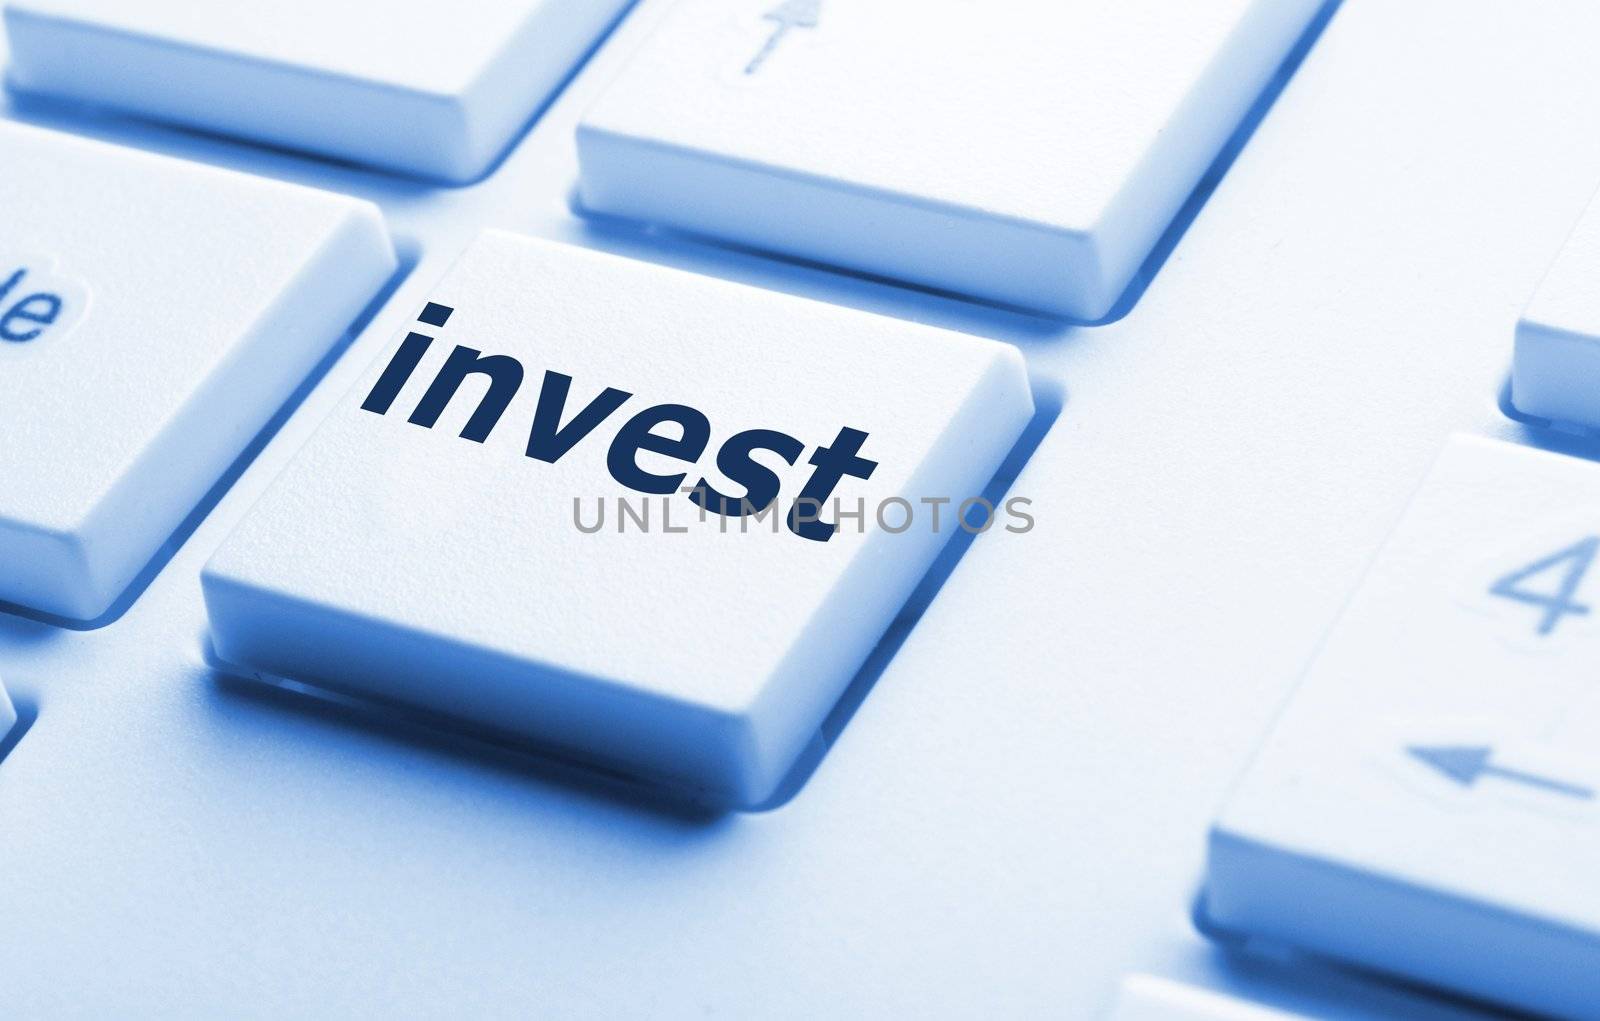 invest key on keyboard showing financial business investment concept